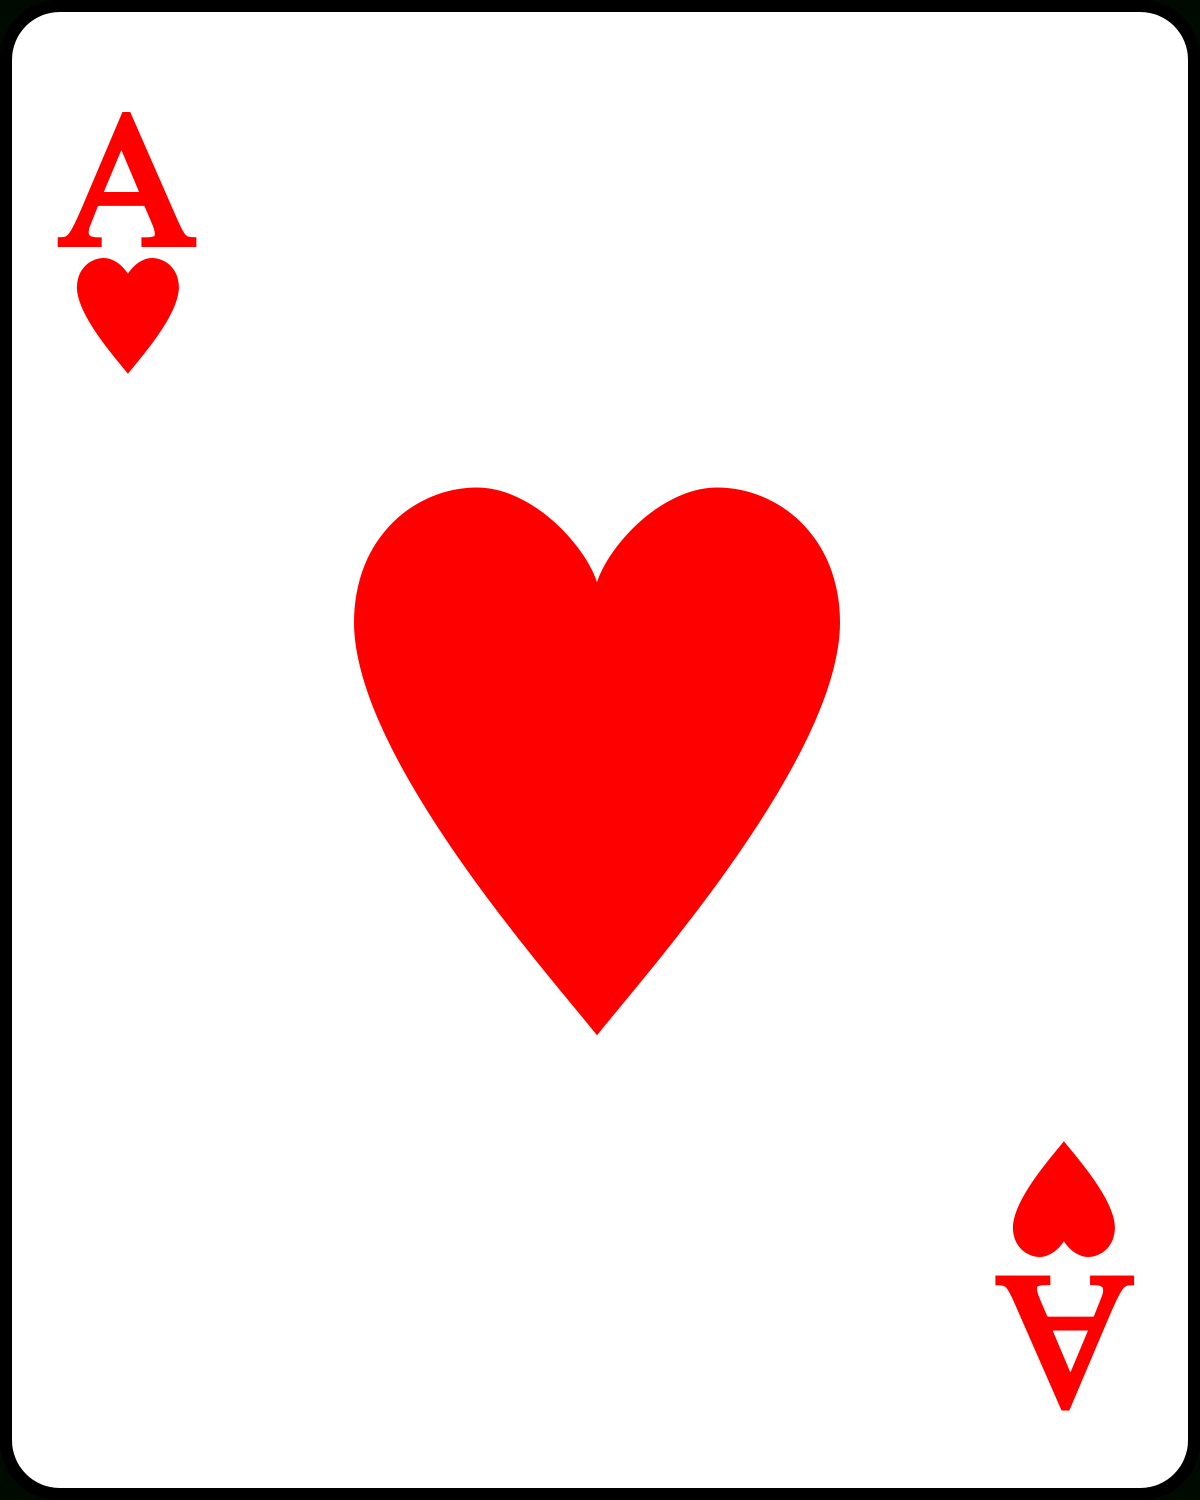 File:playing Card Heart A.svg – Wikimedia Commons Intended For Deck Of Cards Template